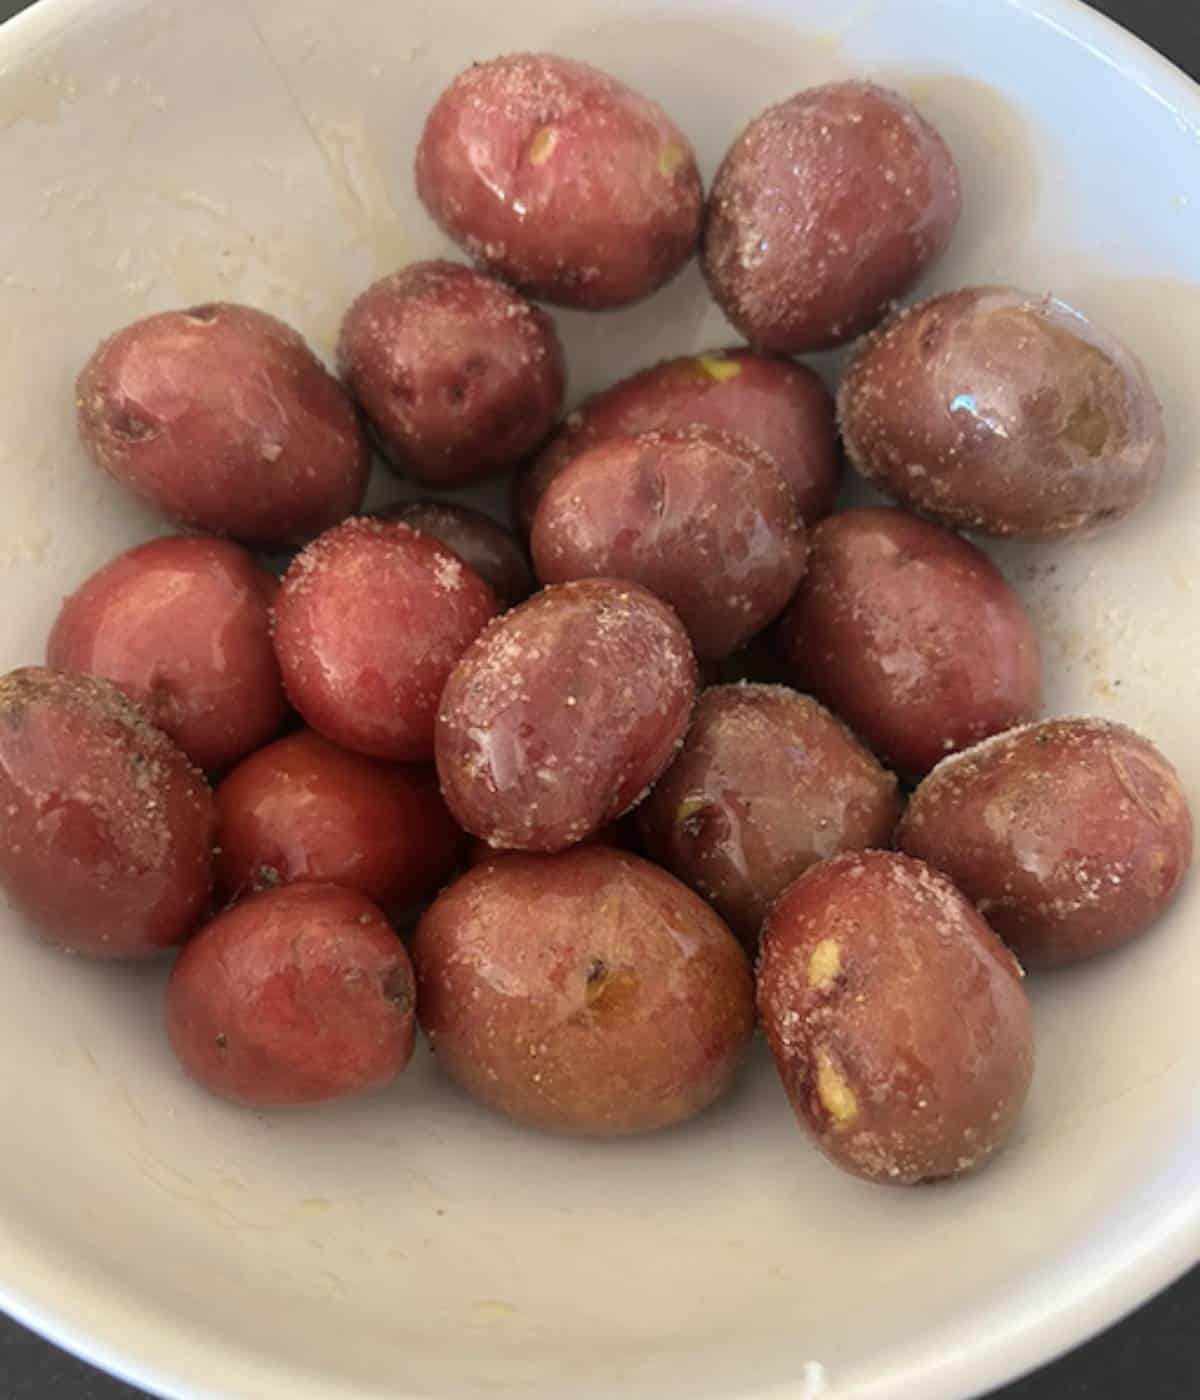 Bite size potatoes in bowl with olive oil salt and pepper.